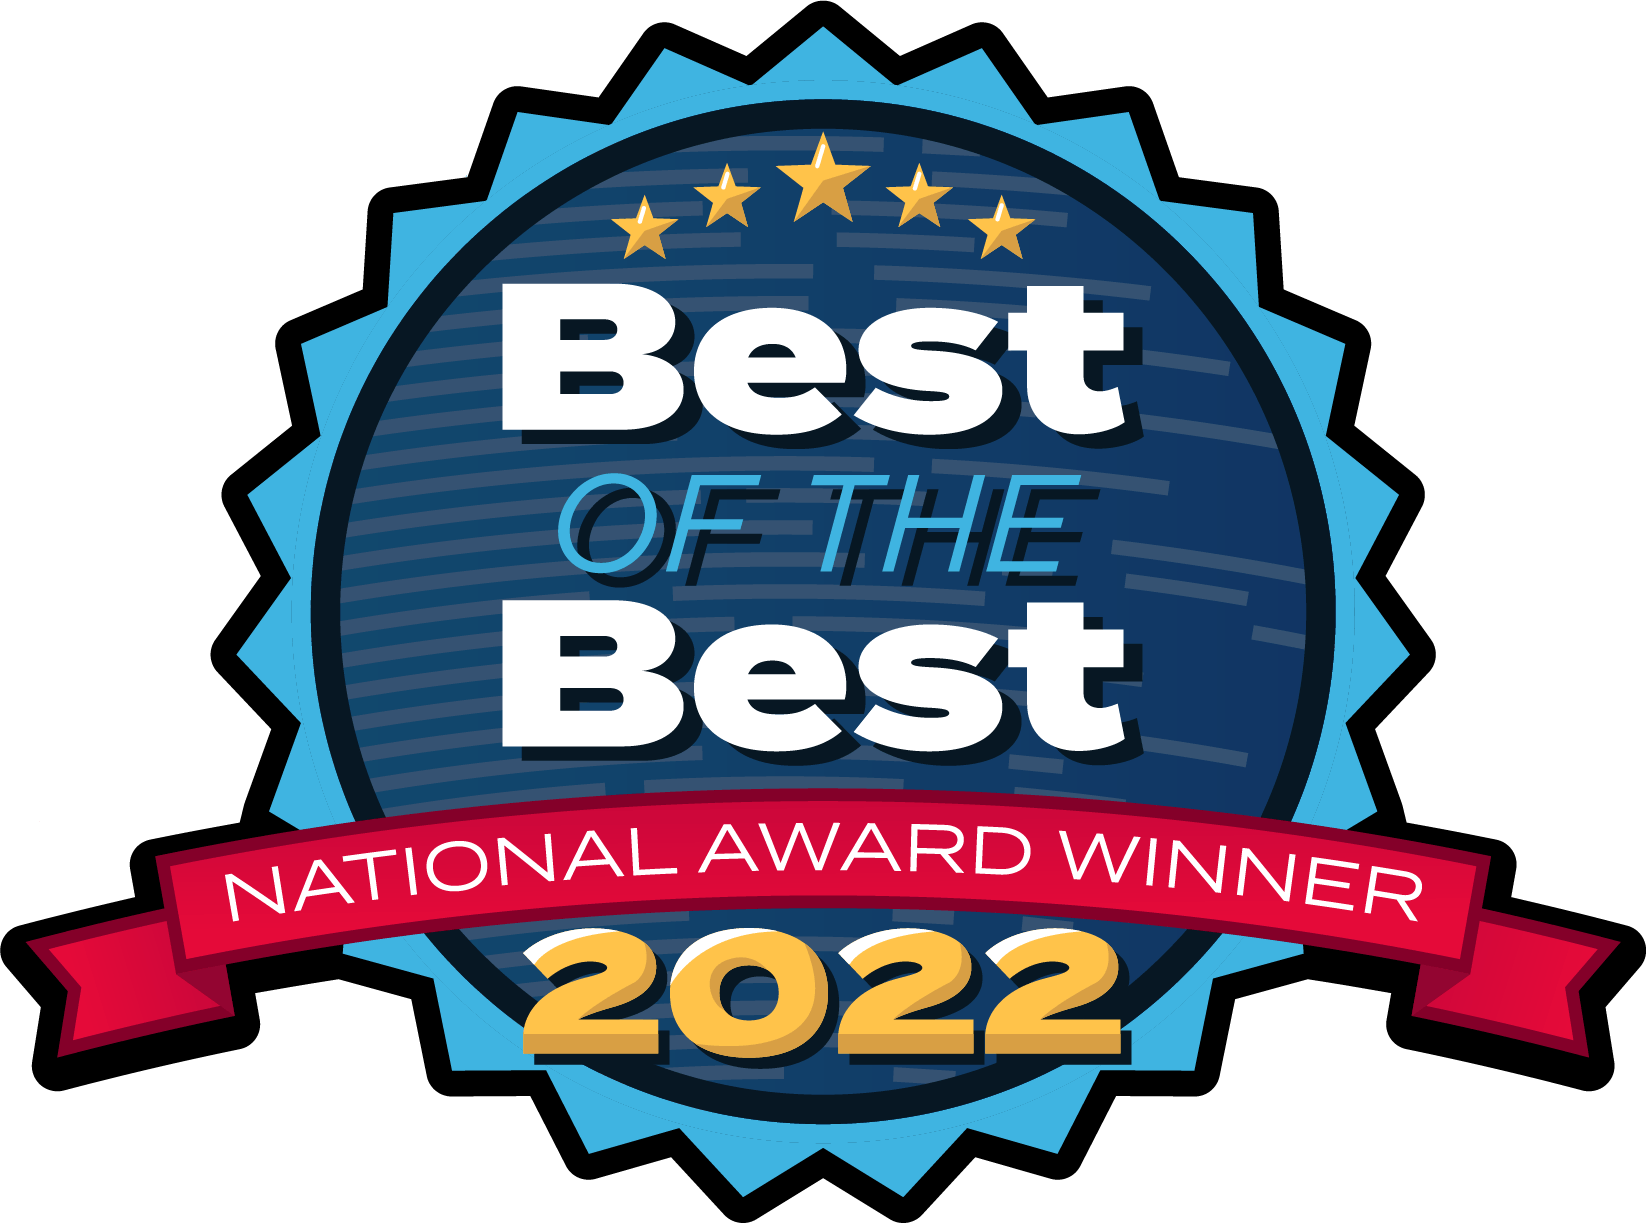 BEST of the BEST 2022